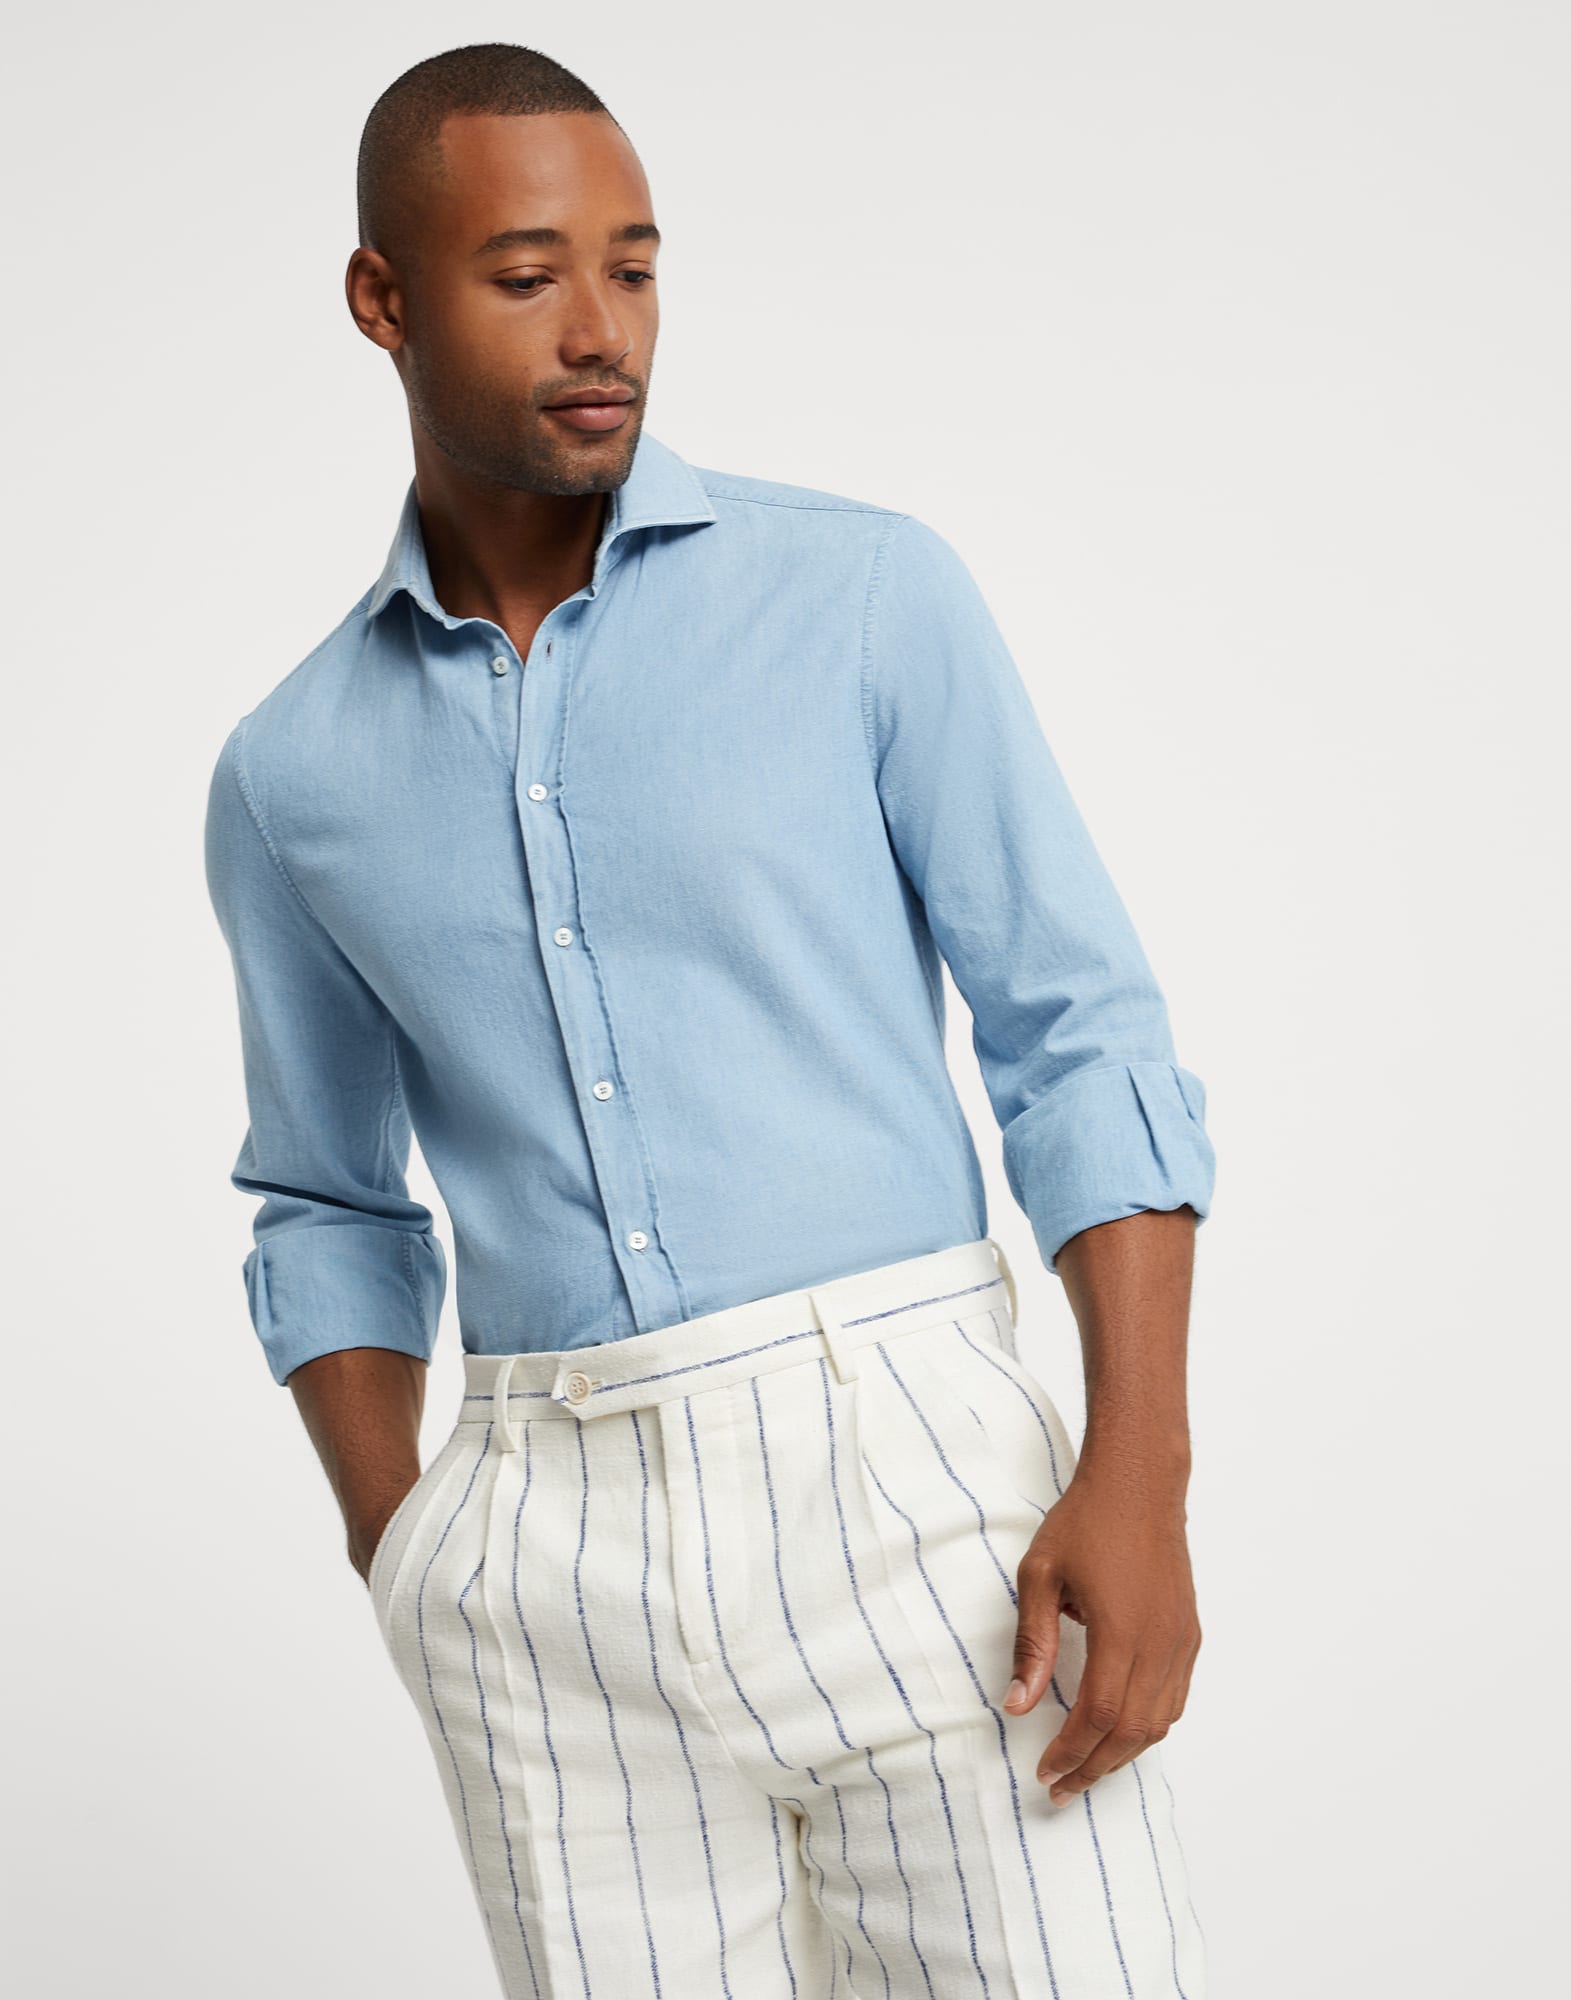 Men's casual and dress shirts